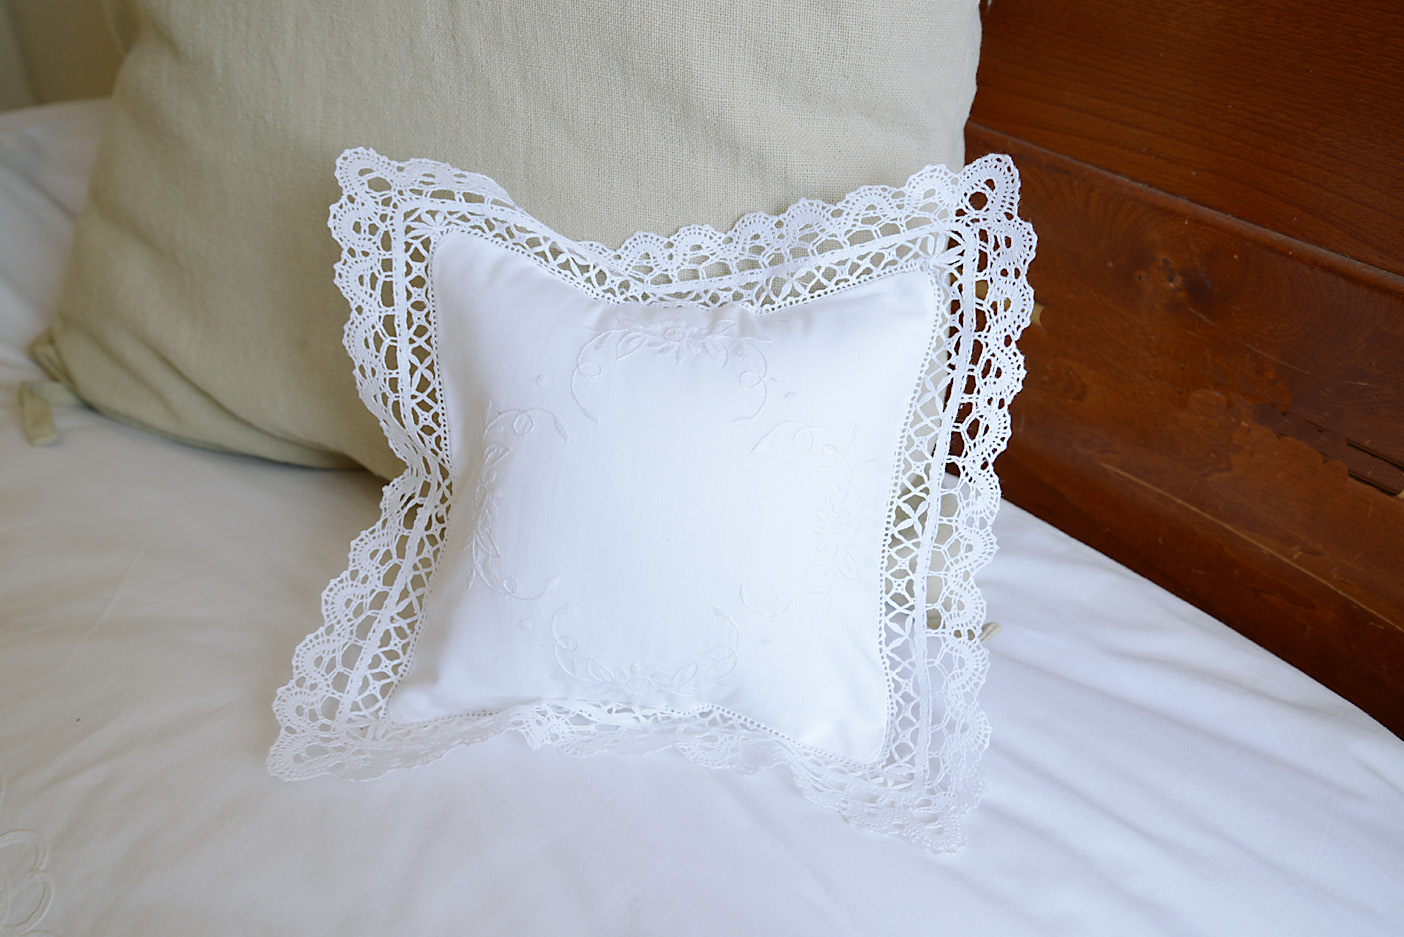 southern hearts baby pillow, 8'x8"